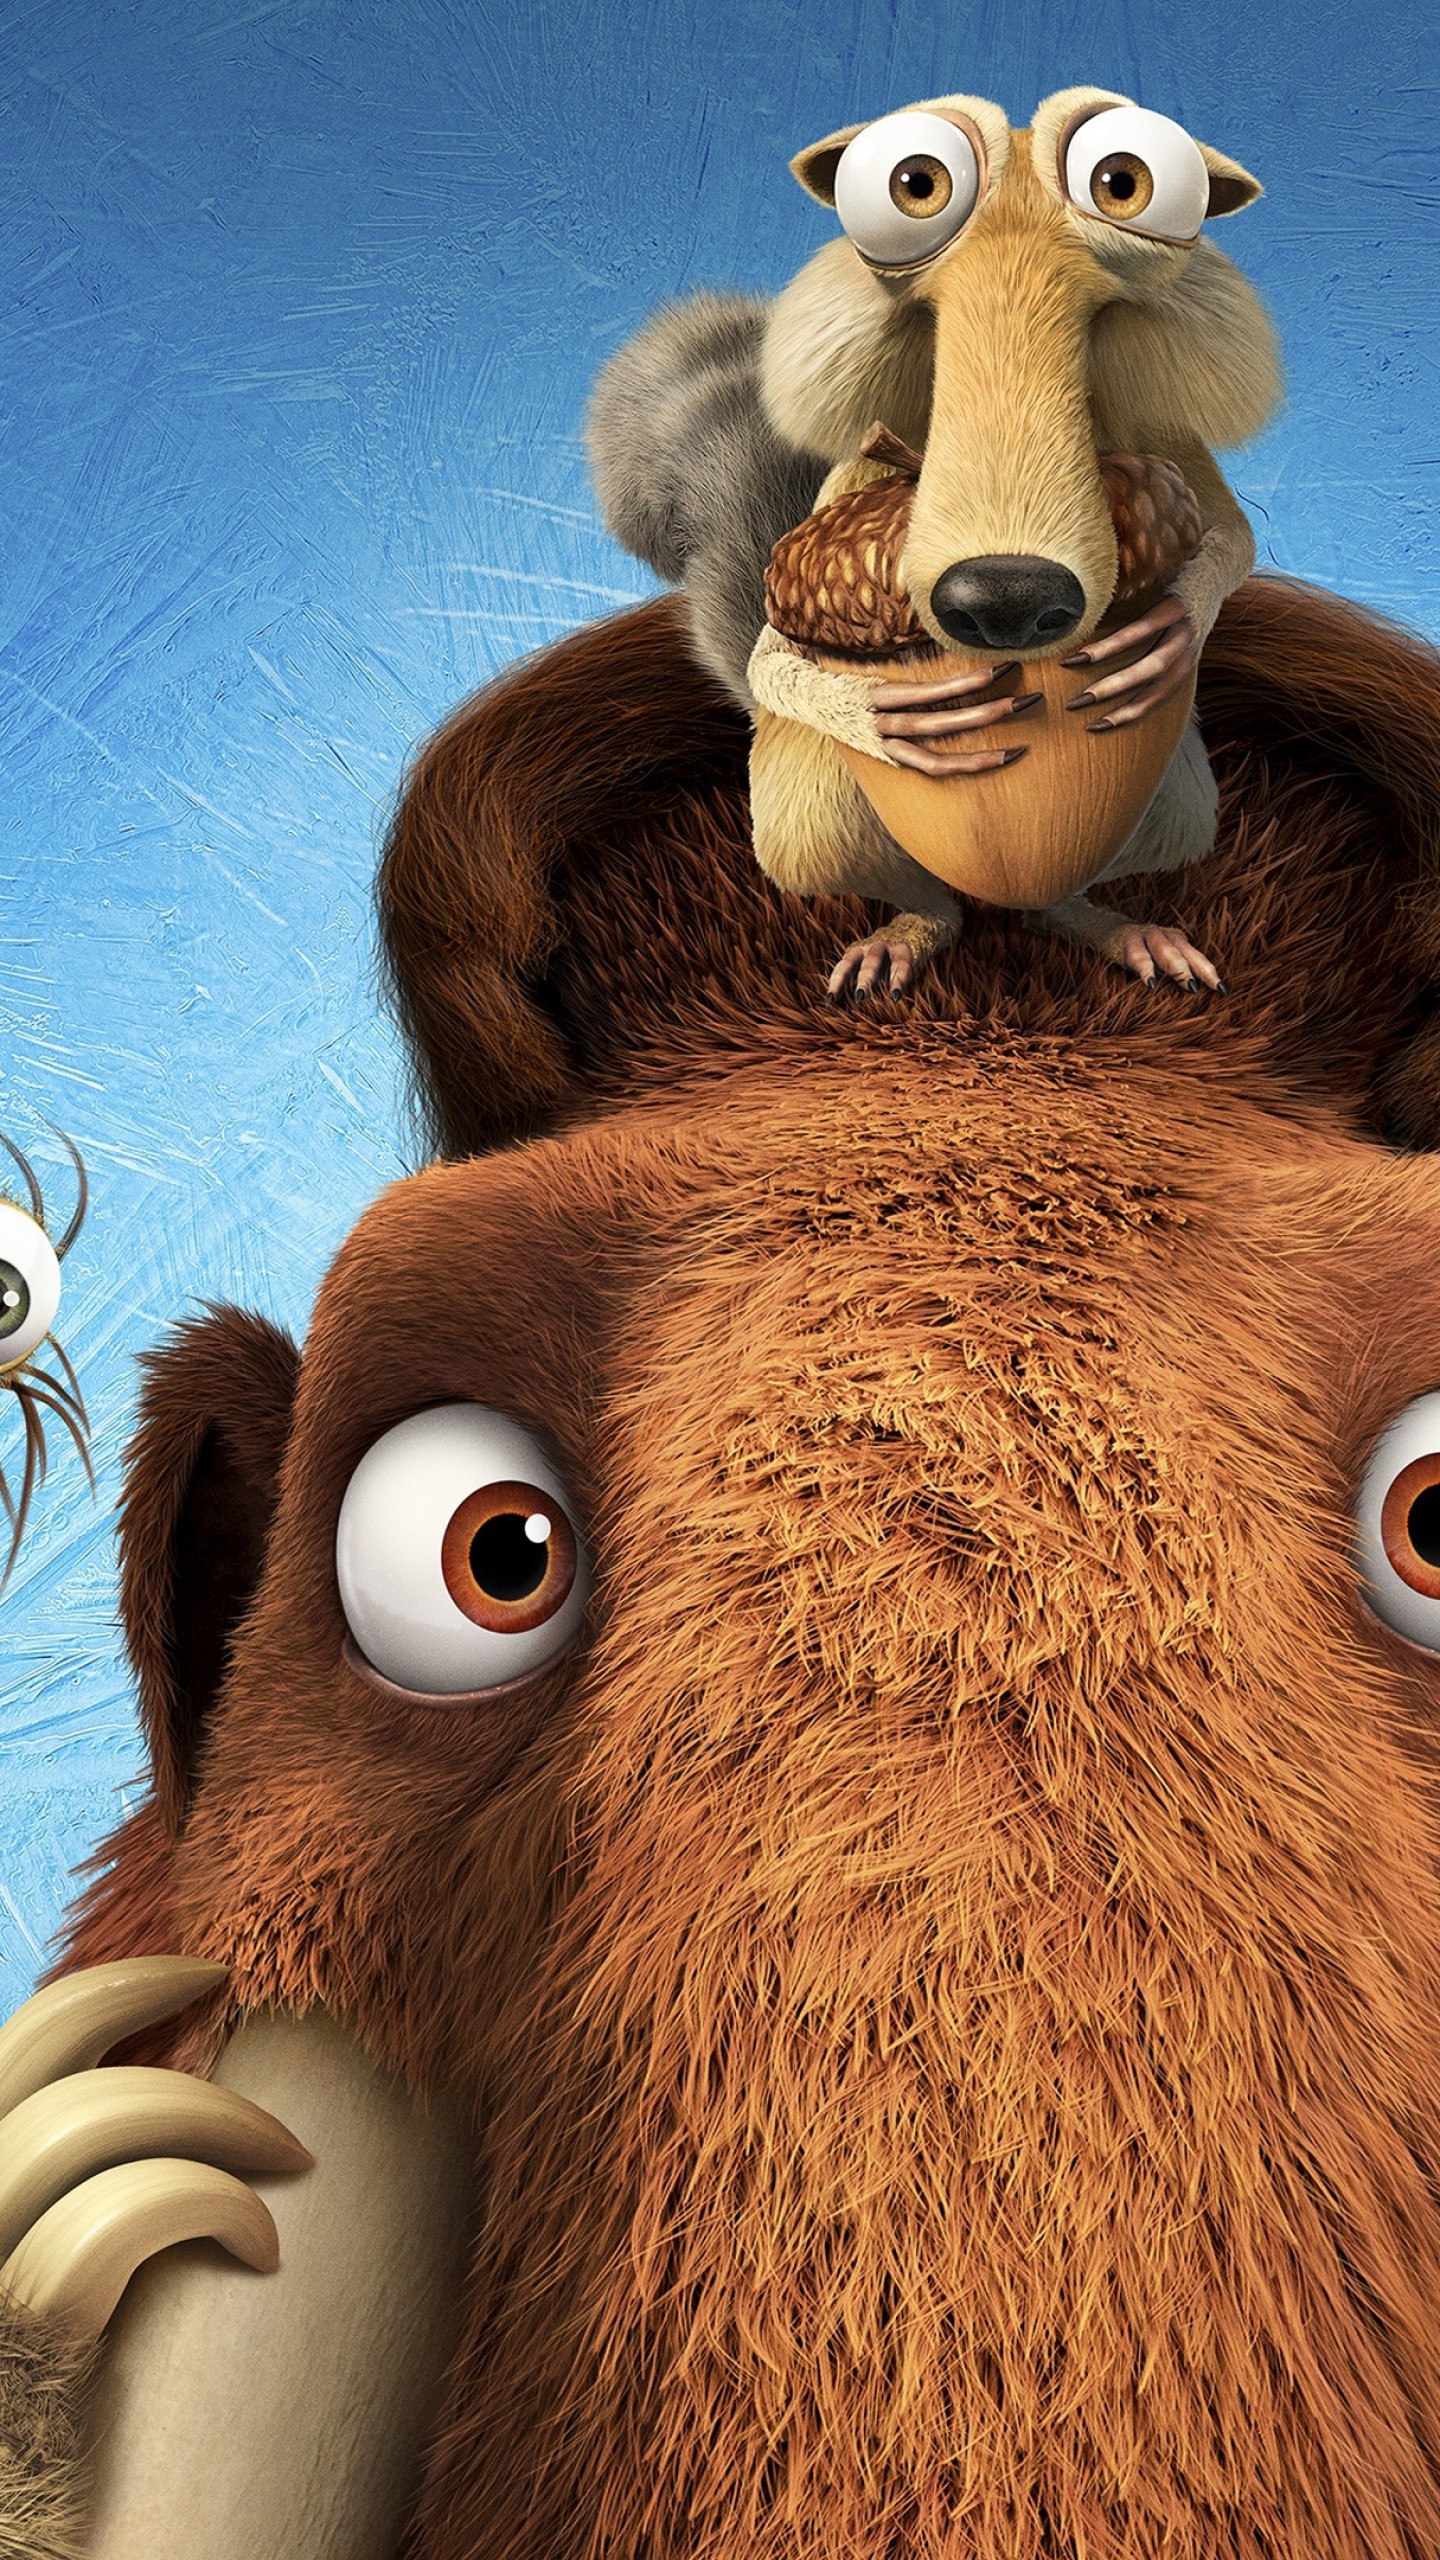 Wallpaper Ice Age 5: Collision Course, diego, manny, scrat, sid, mammoths, best animations of Movies